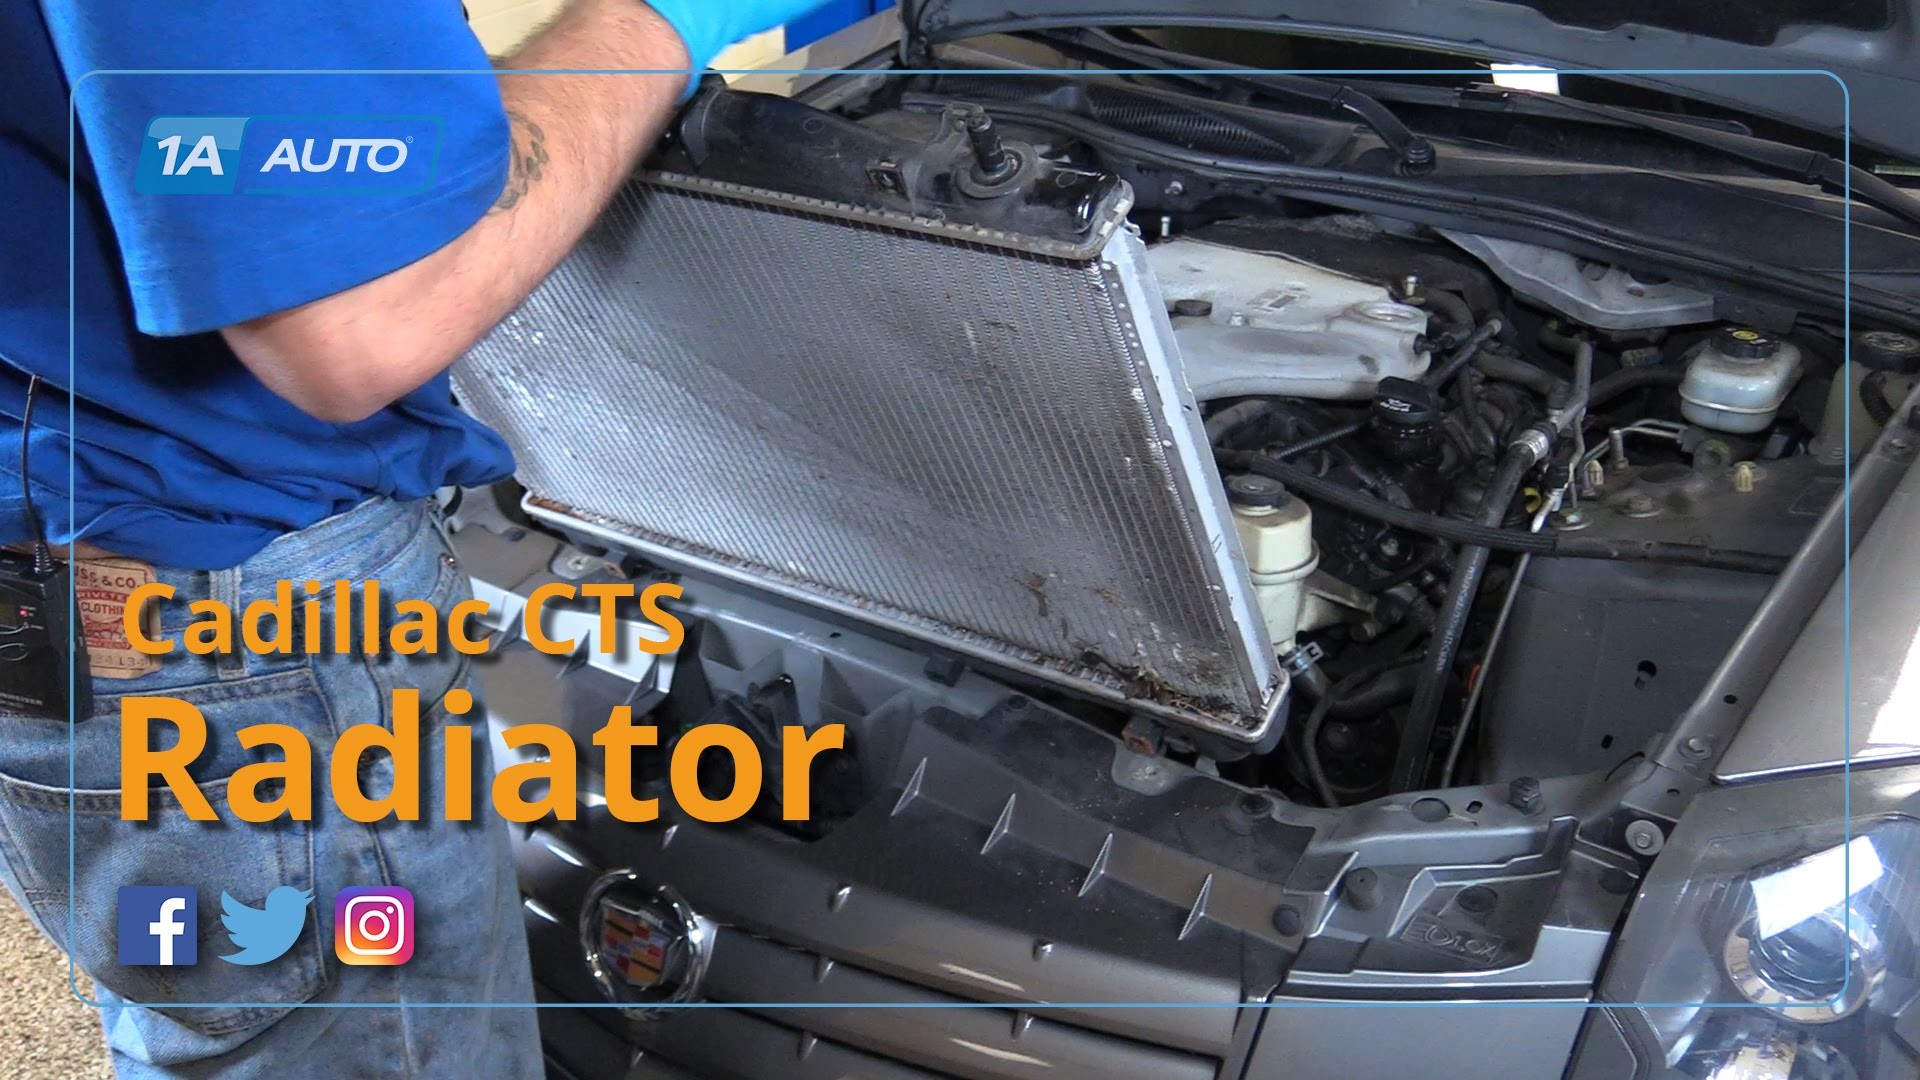 Diagram Of Car Radiator How to Replace Install Radiator 04 06 Cadillac Cts Of Diagram Of Car Radiator